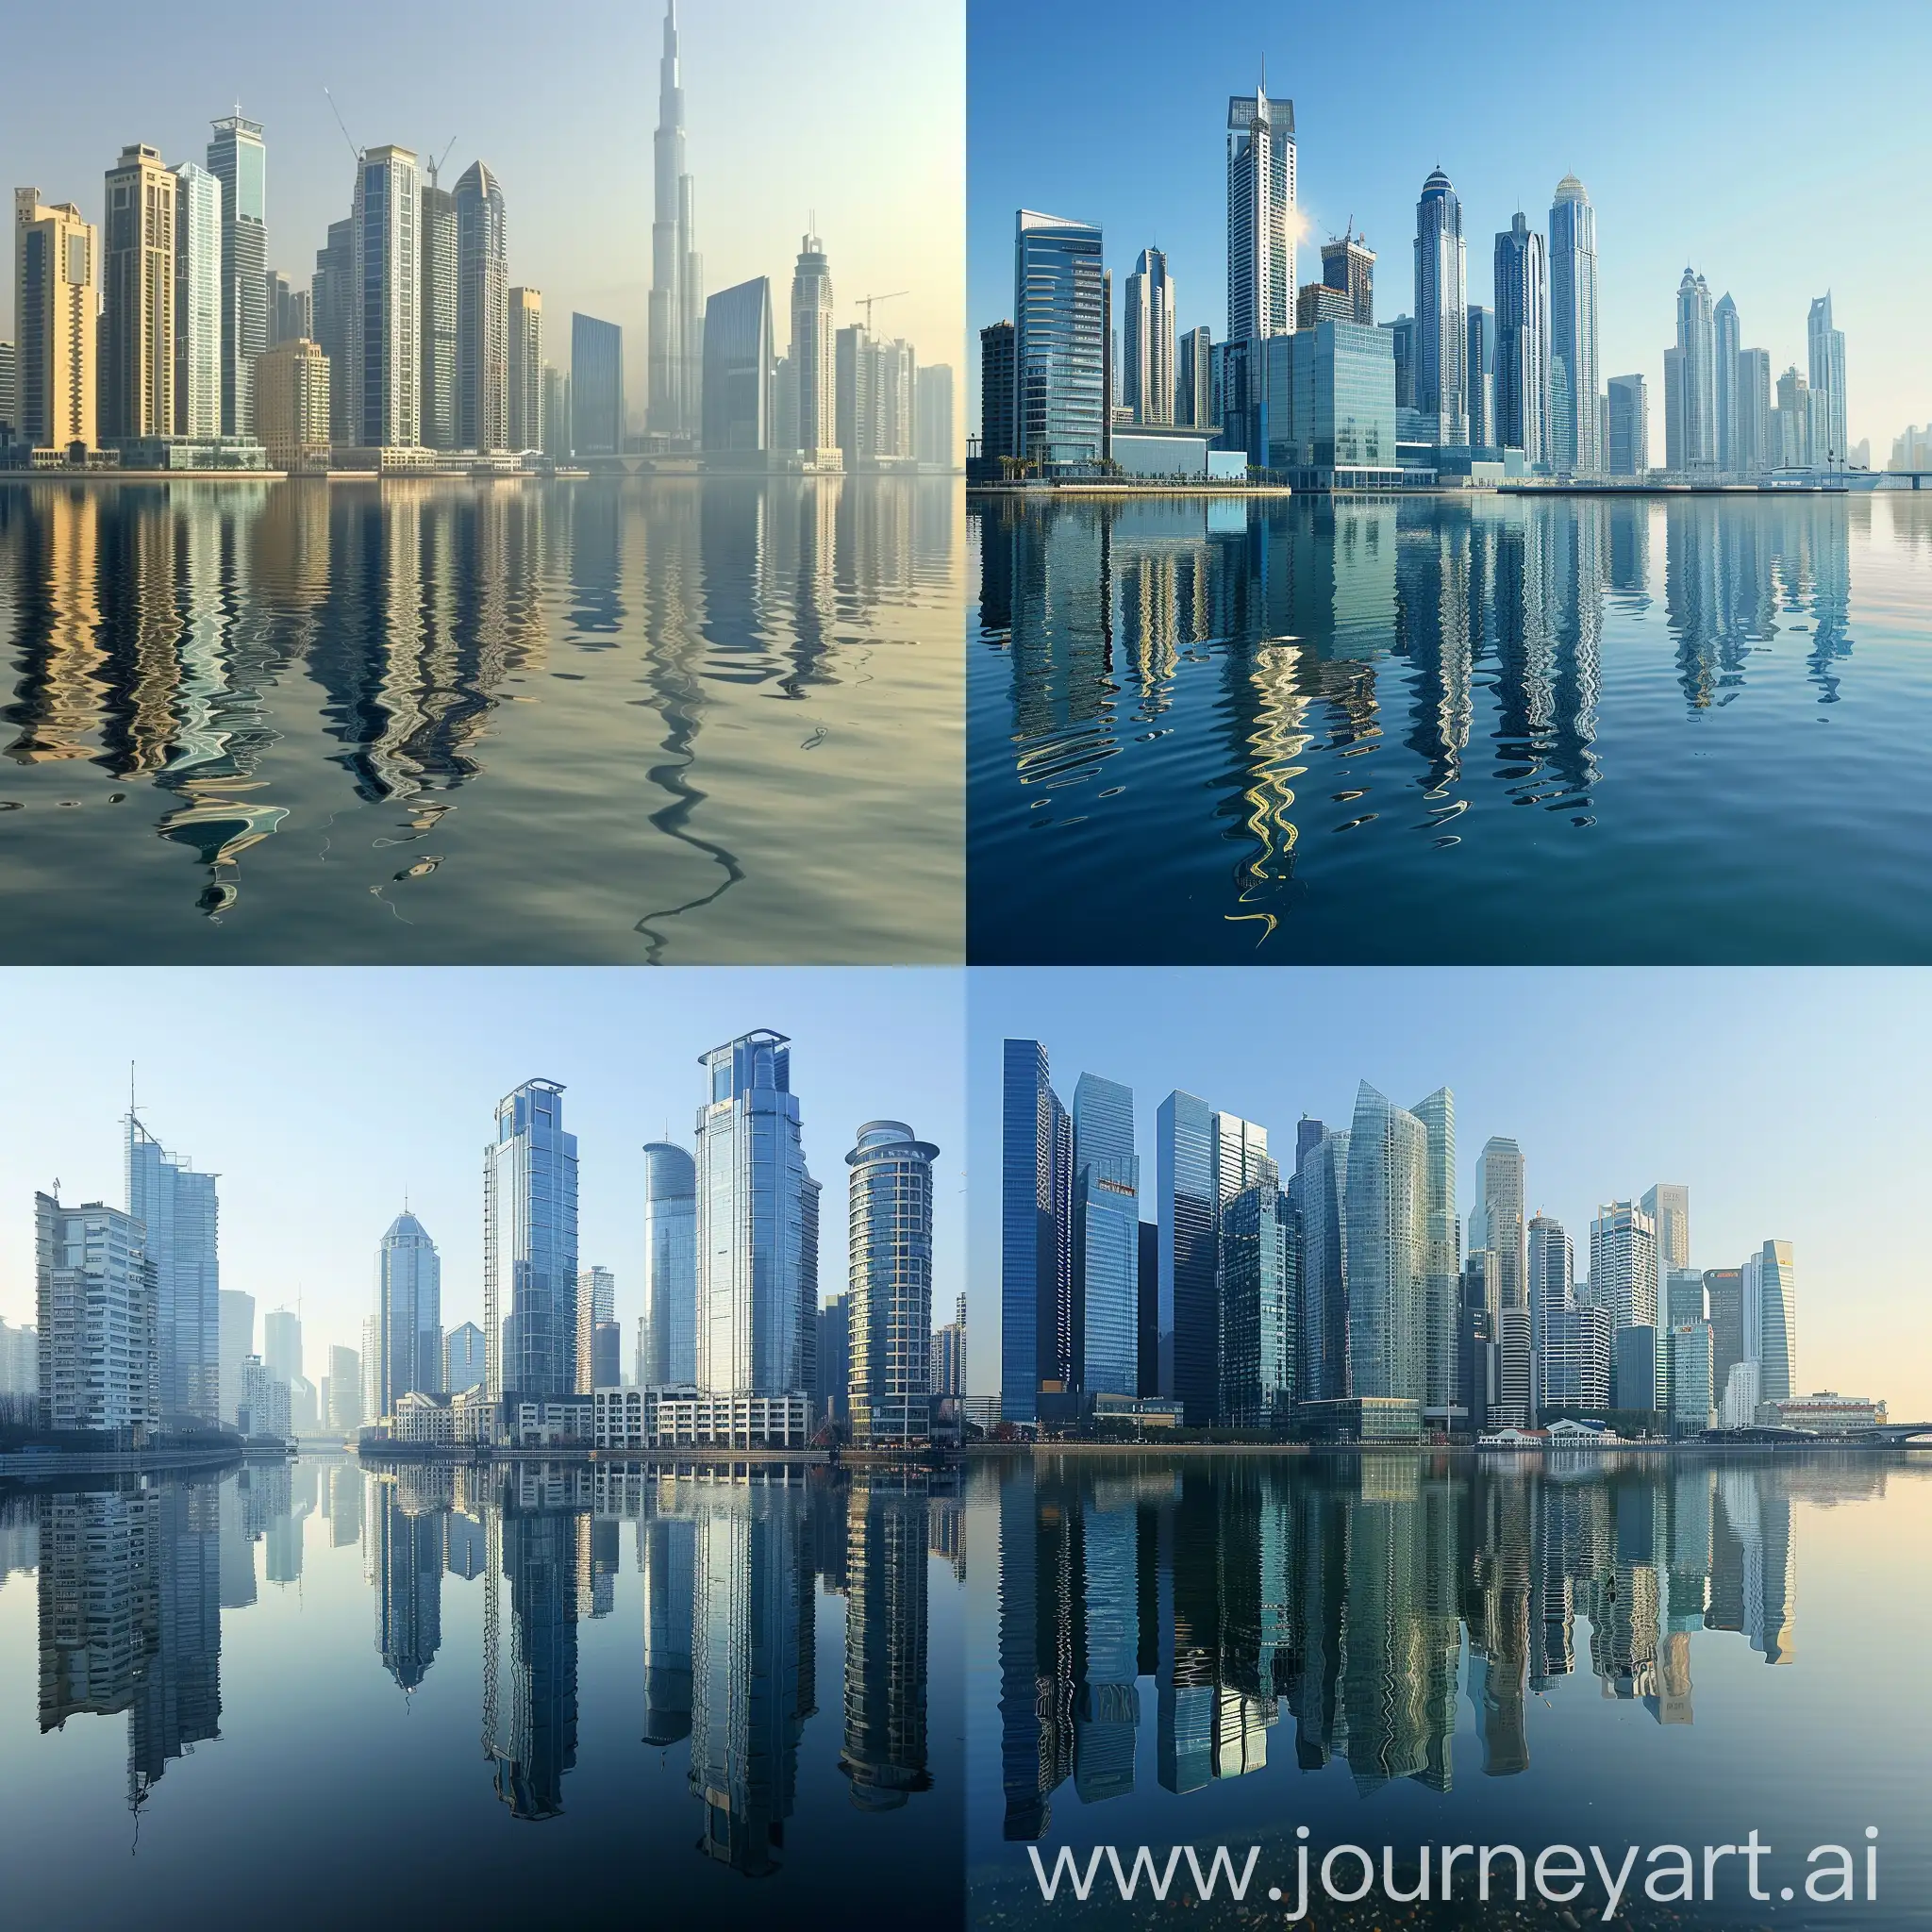 the city skyline, modern urban background, reflecting on water. The scene includes tall buildings, skyscrapers, and a clear sky, in high quality 